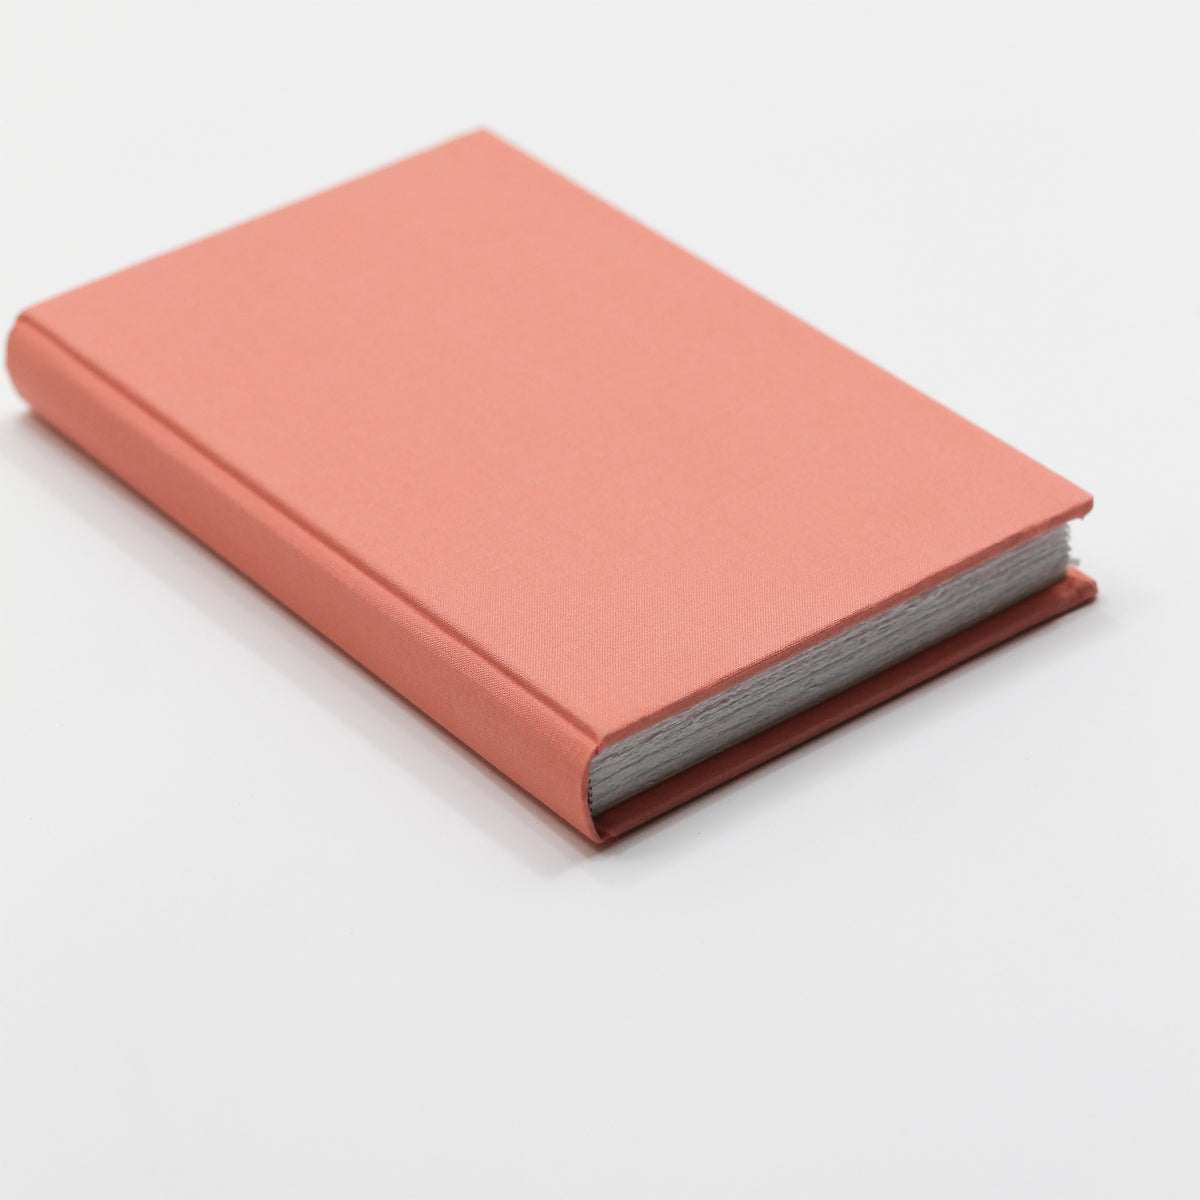 Medium 5.5x8.5 Blank Page Journal | Cover: Coral Cotton | Available Personalized